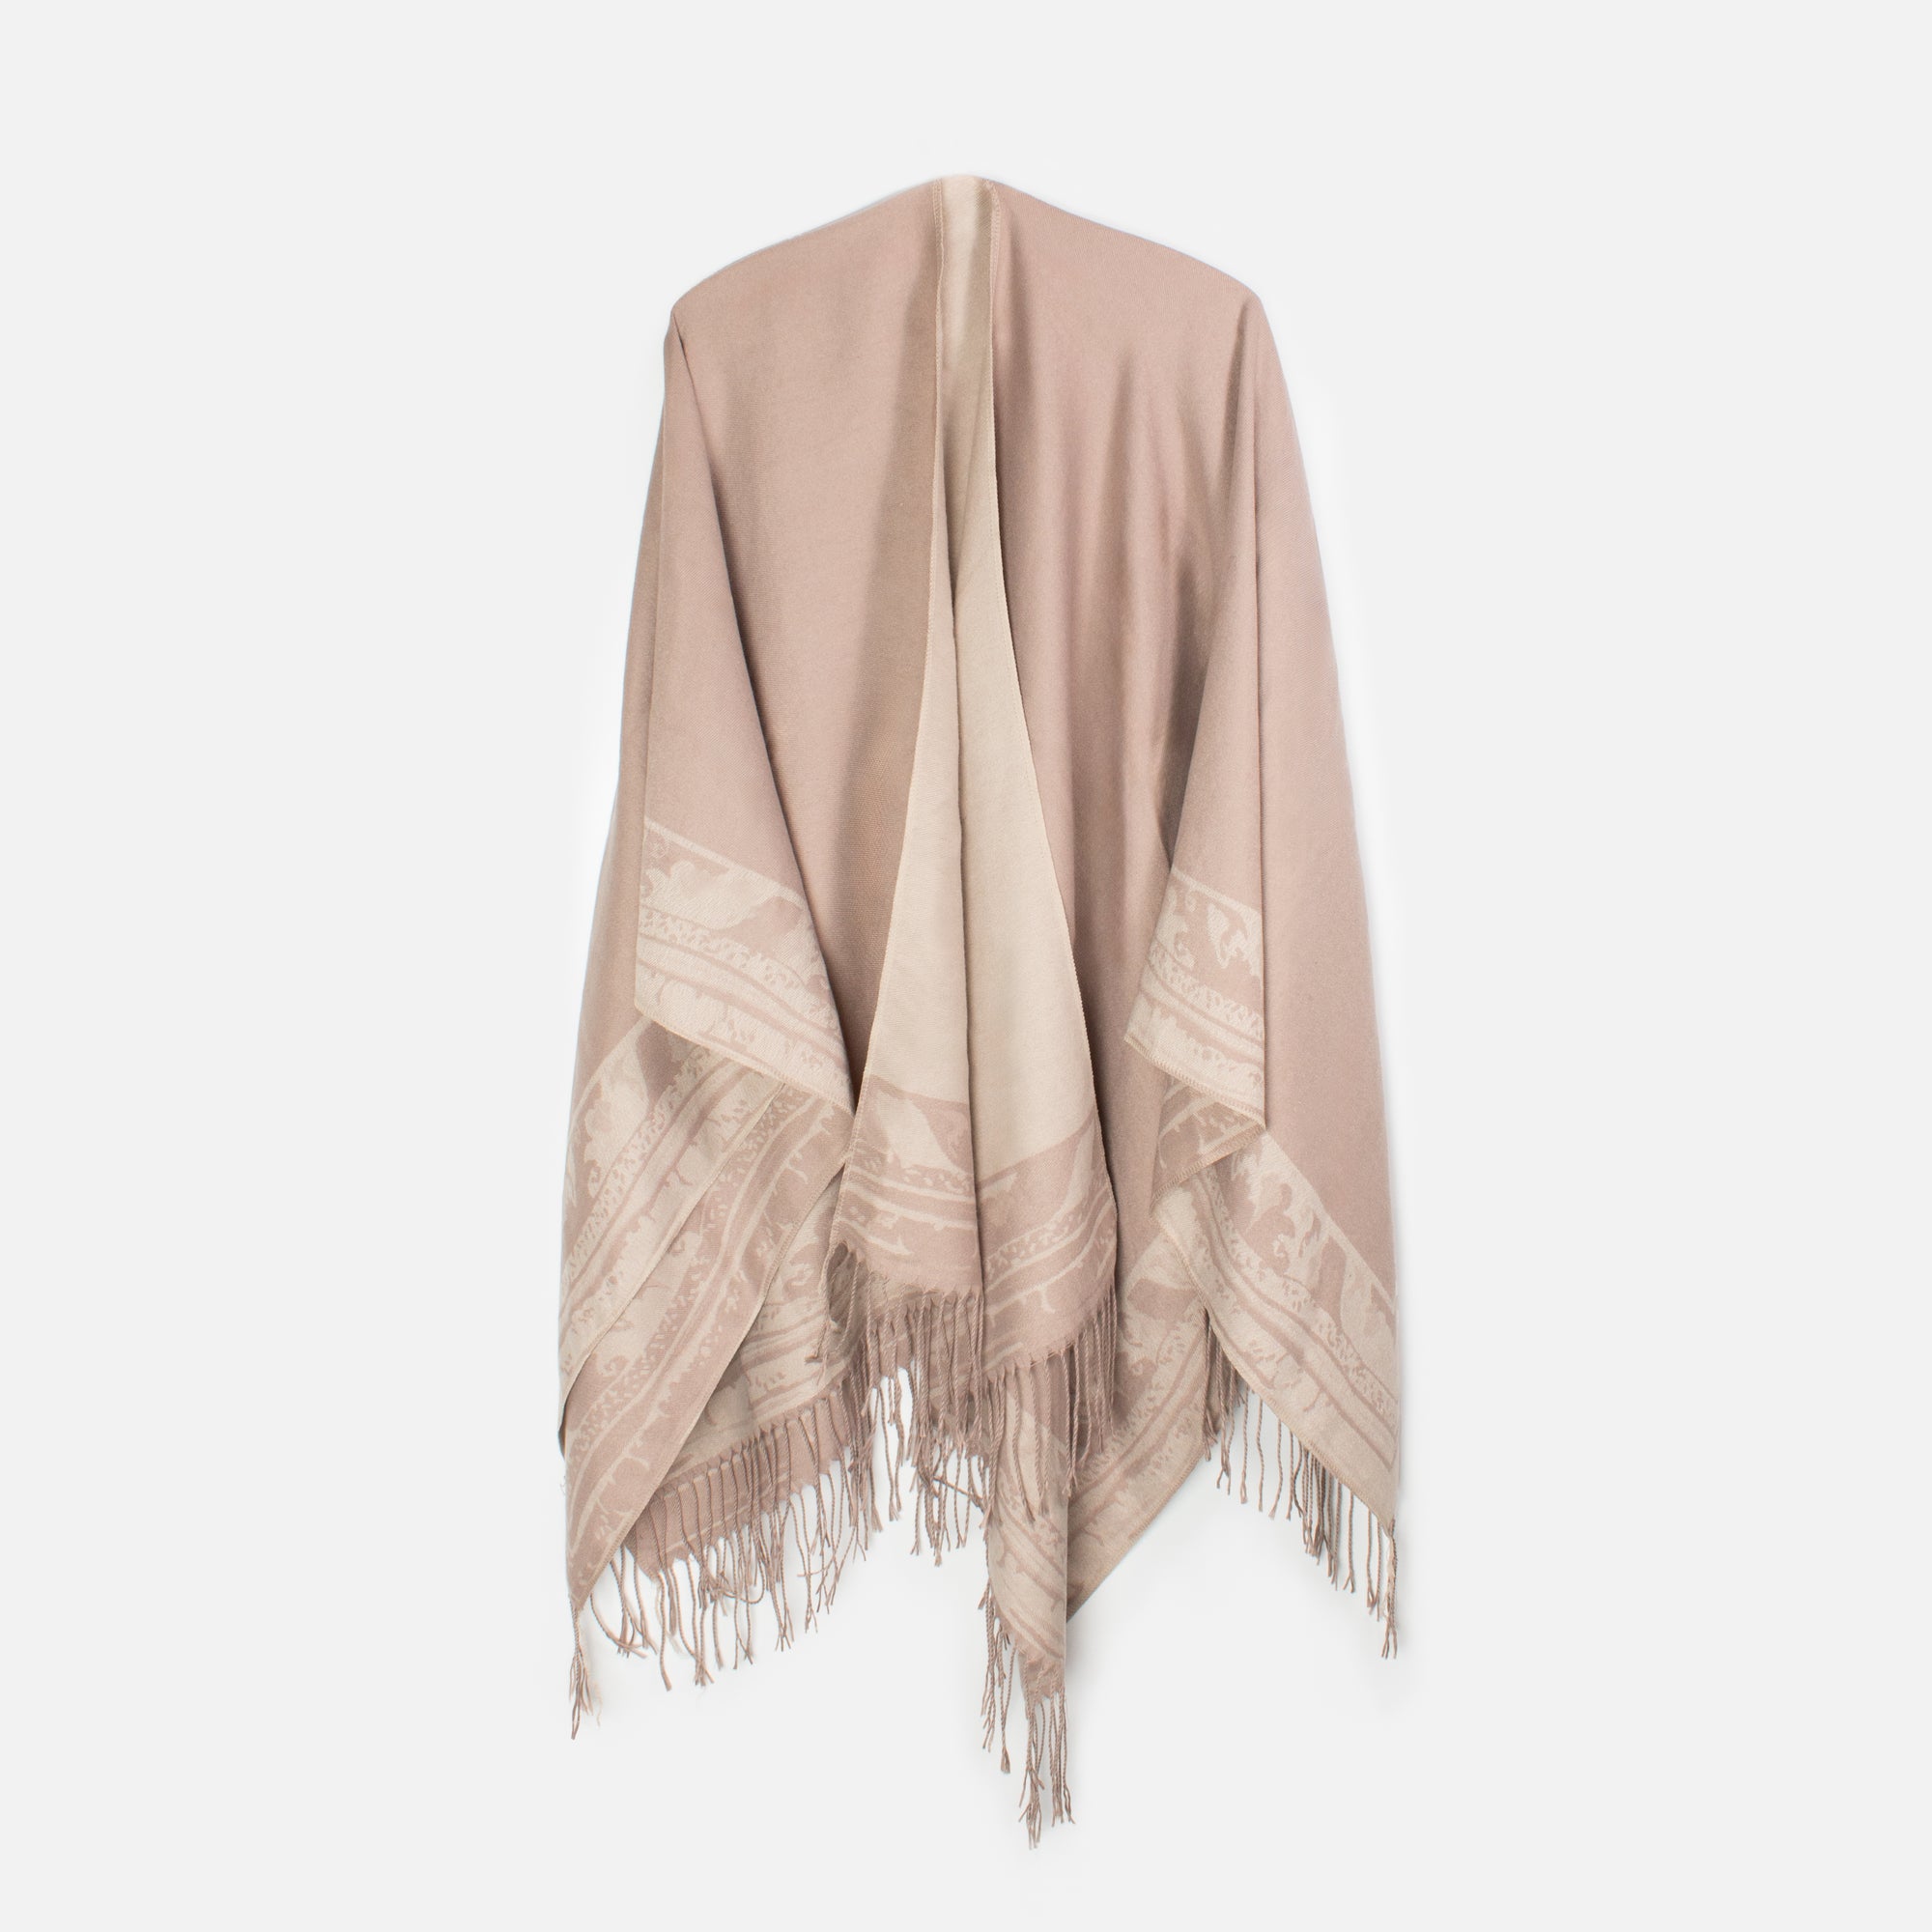 Beige poncho with pattern and fringe